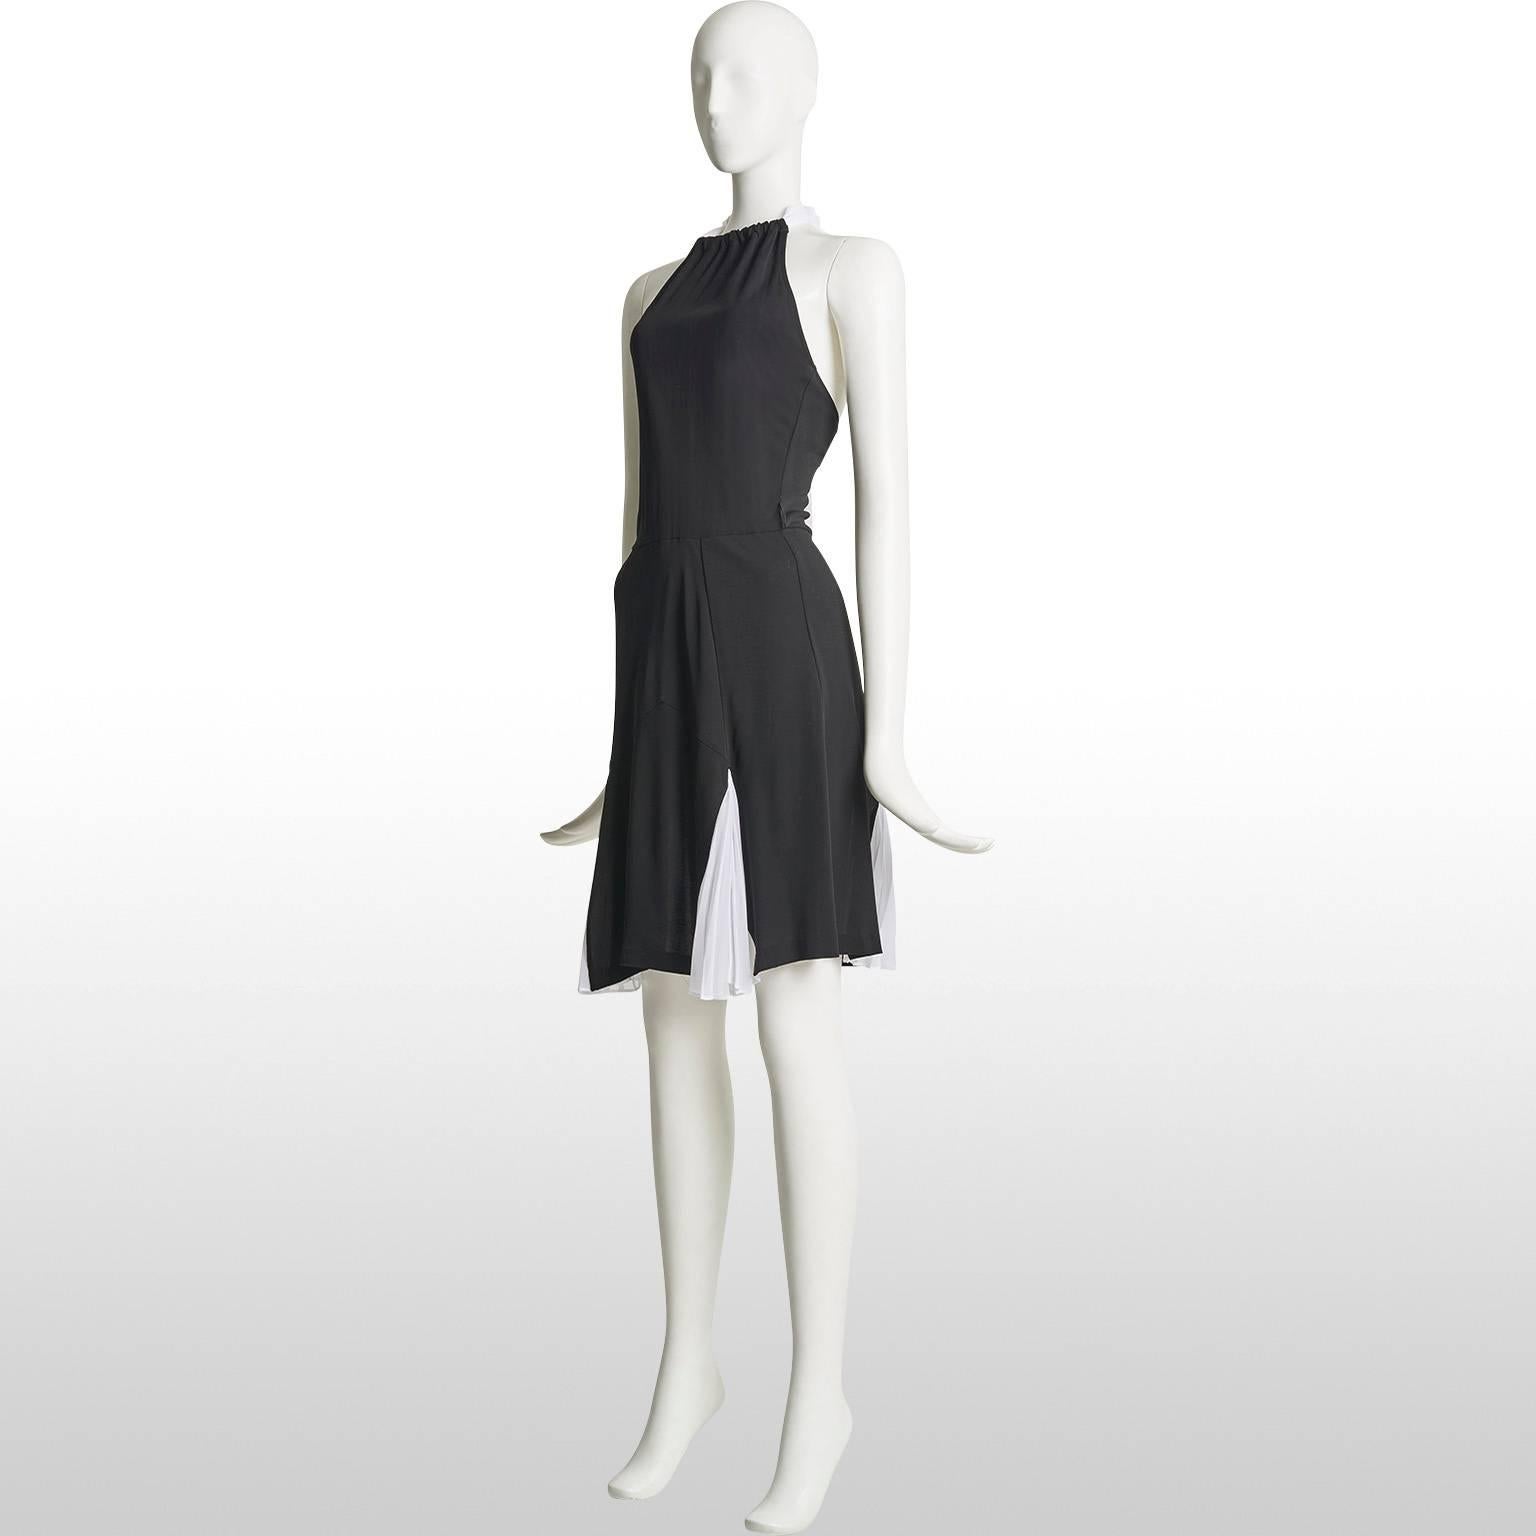 This is a black and white cocktail dress by the designer Diane Von Furstenberg. The dress has a gathered halter neck and is backless. At the bottom of the dress there are white triangular pleats which gives it a flair. The dress is kept in excellent